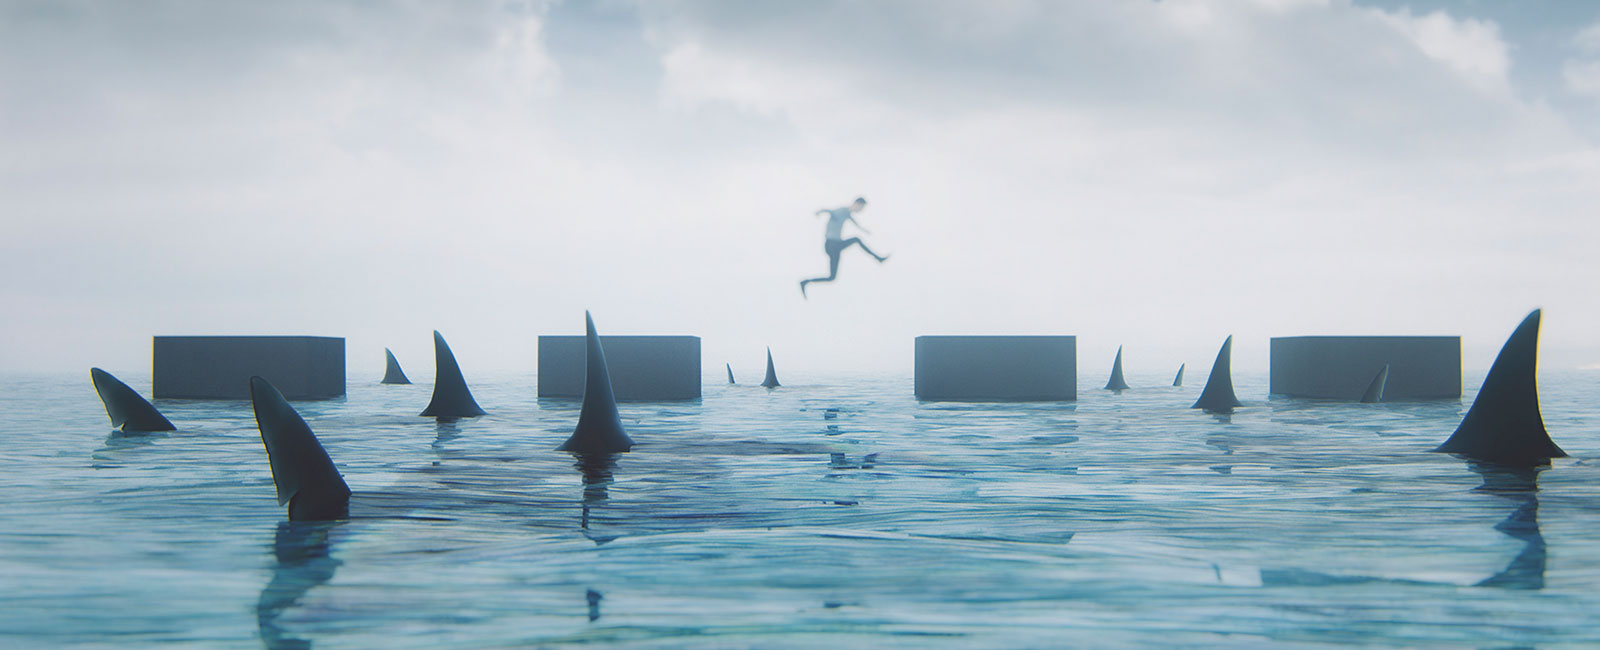 Man jumps over sharks illustrating how to navigate third-party risk management